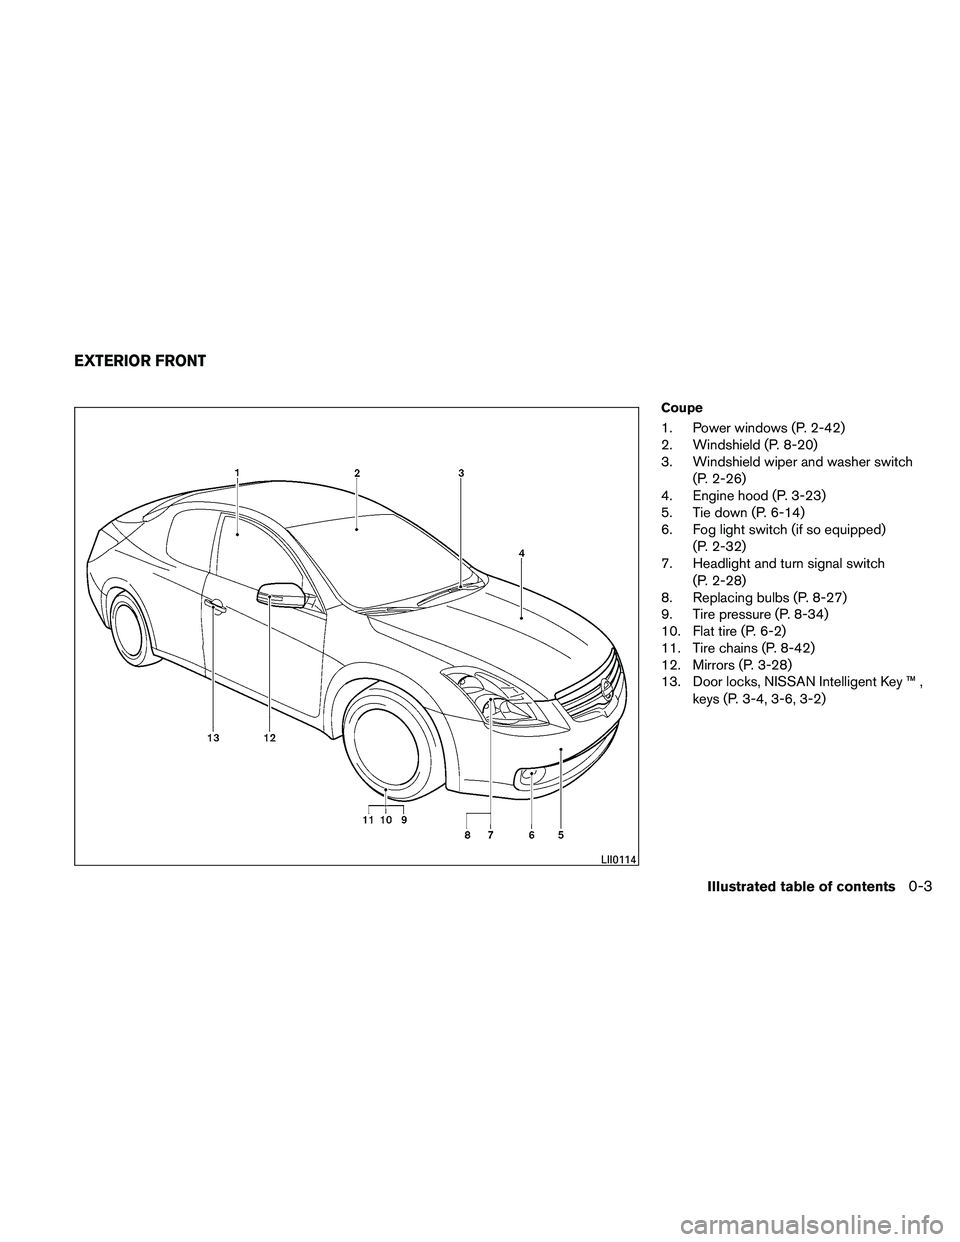 NISSAN ALTIMA 2010  Owners Manual Coupe
1. Power windows (P. 2-42)
2. Windshield (P. 8-20)
3. Windshield wiper and washer switch(P. 2-26)
4. Engine hood (P. 3-23)
5. Tie down (P. 6-14)
6. Fog light switch (if so equipped)
(P. 2-32)
7.